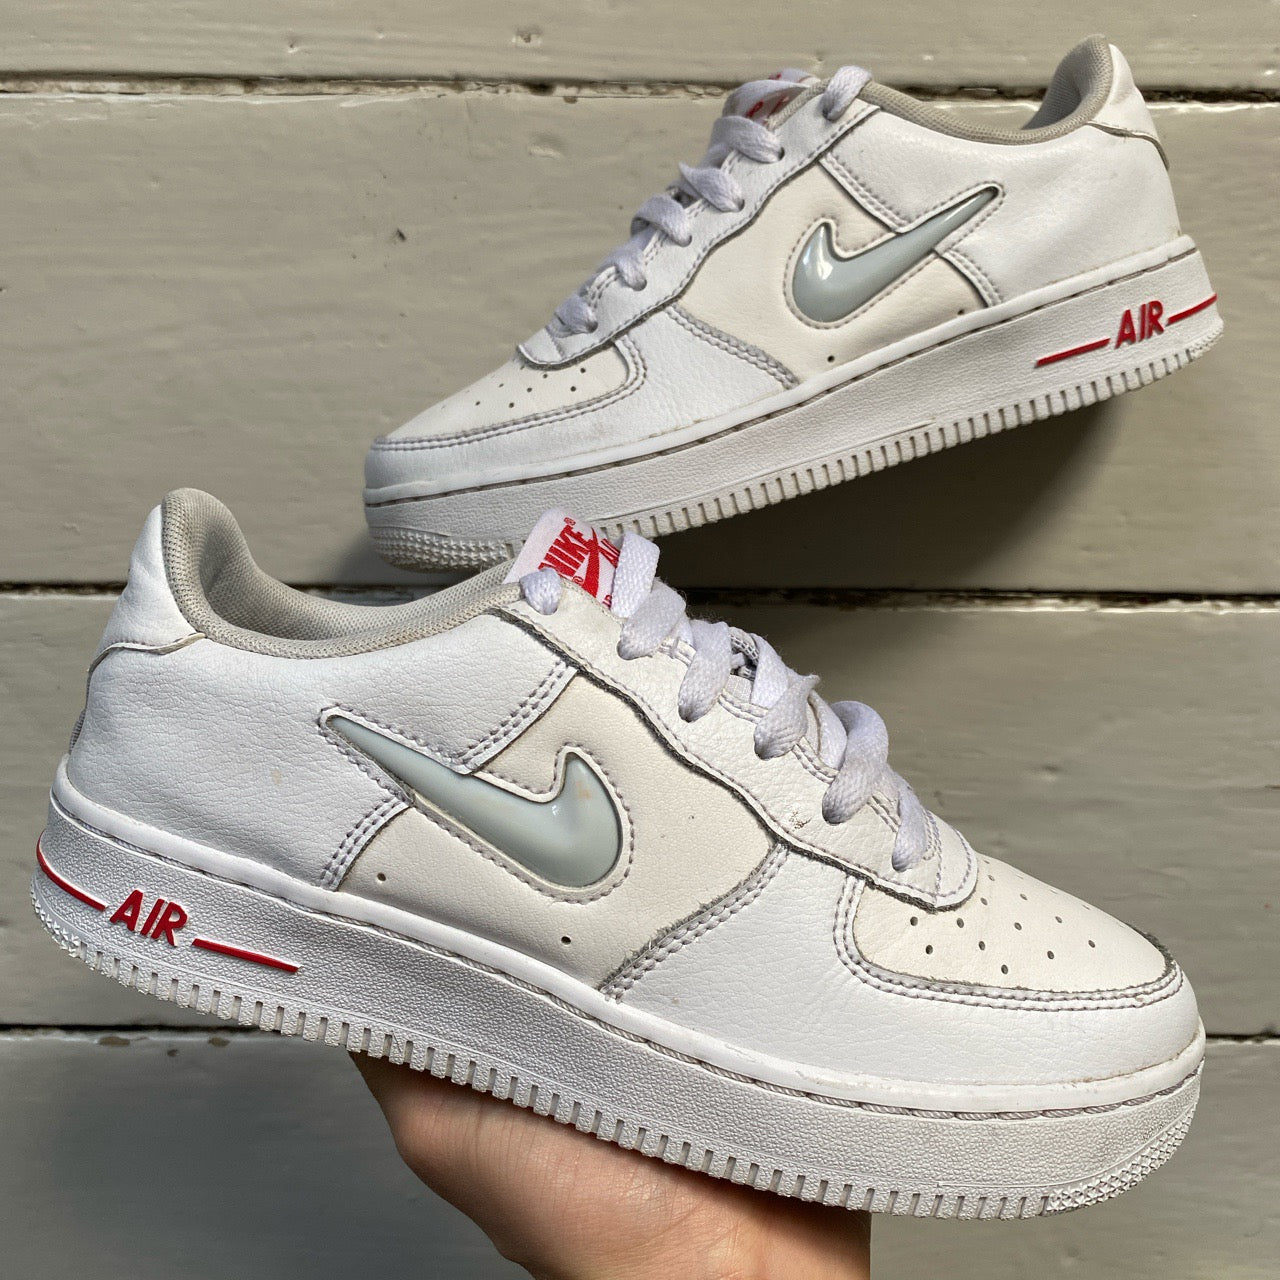 Nike Air Force 1 Jewel White and Red (UK 4)